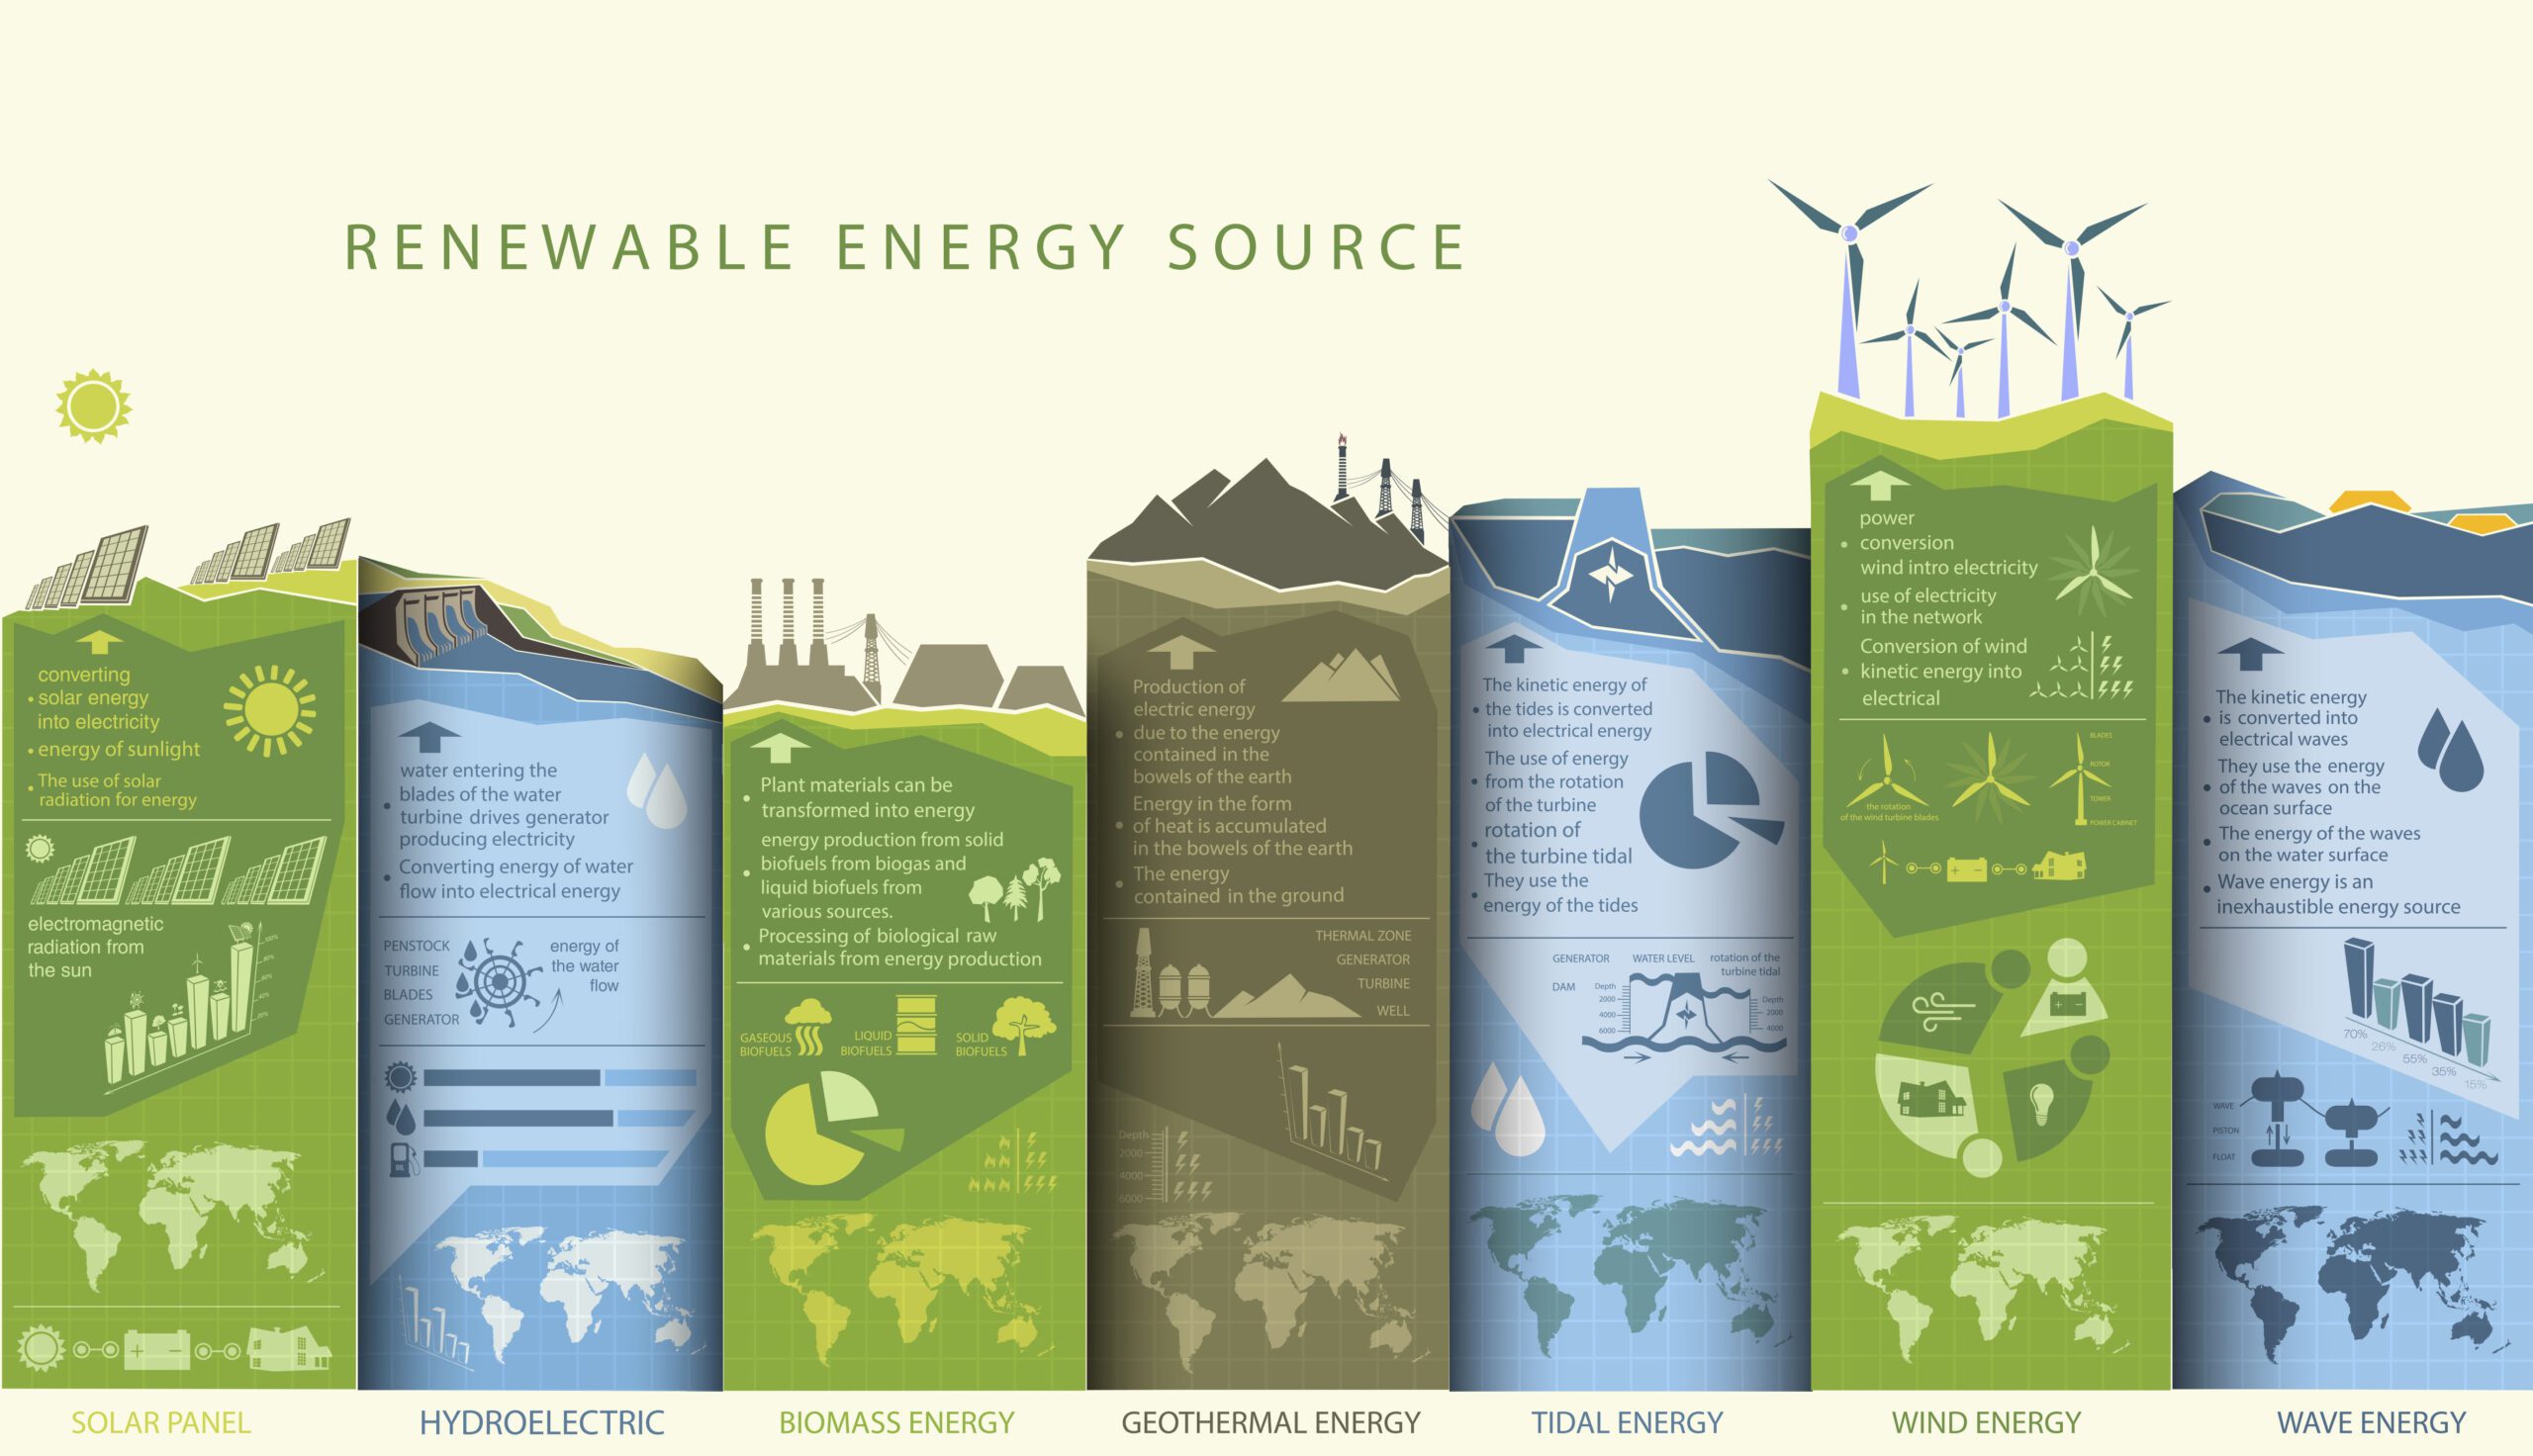 An infographic describing the different renewable energy sources.